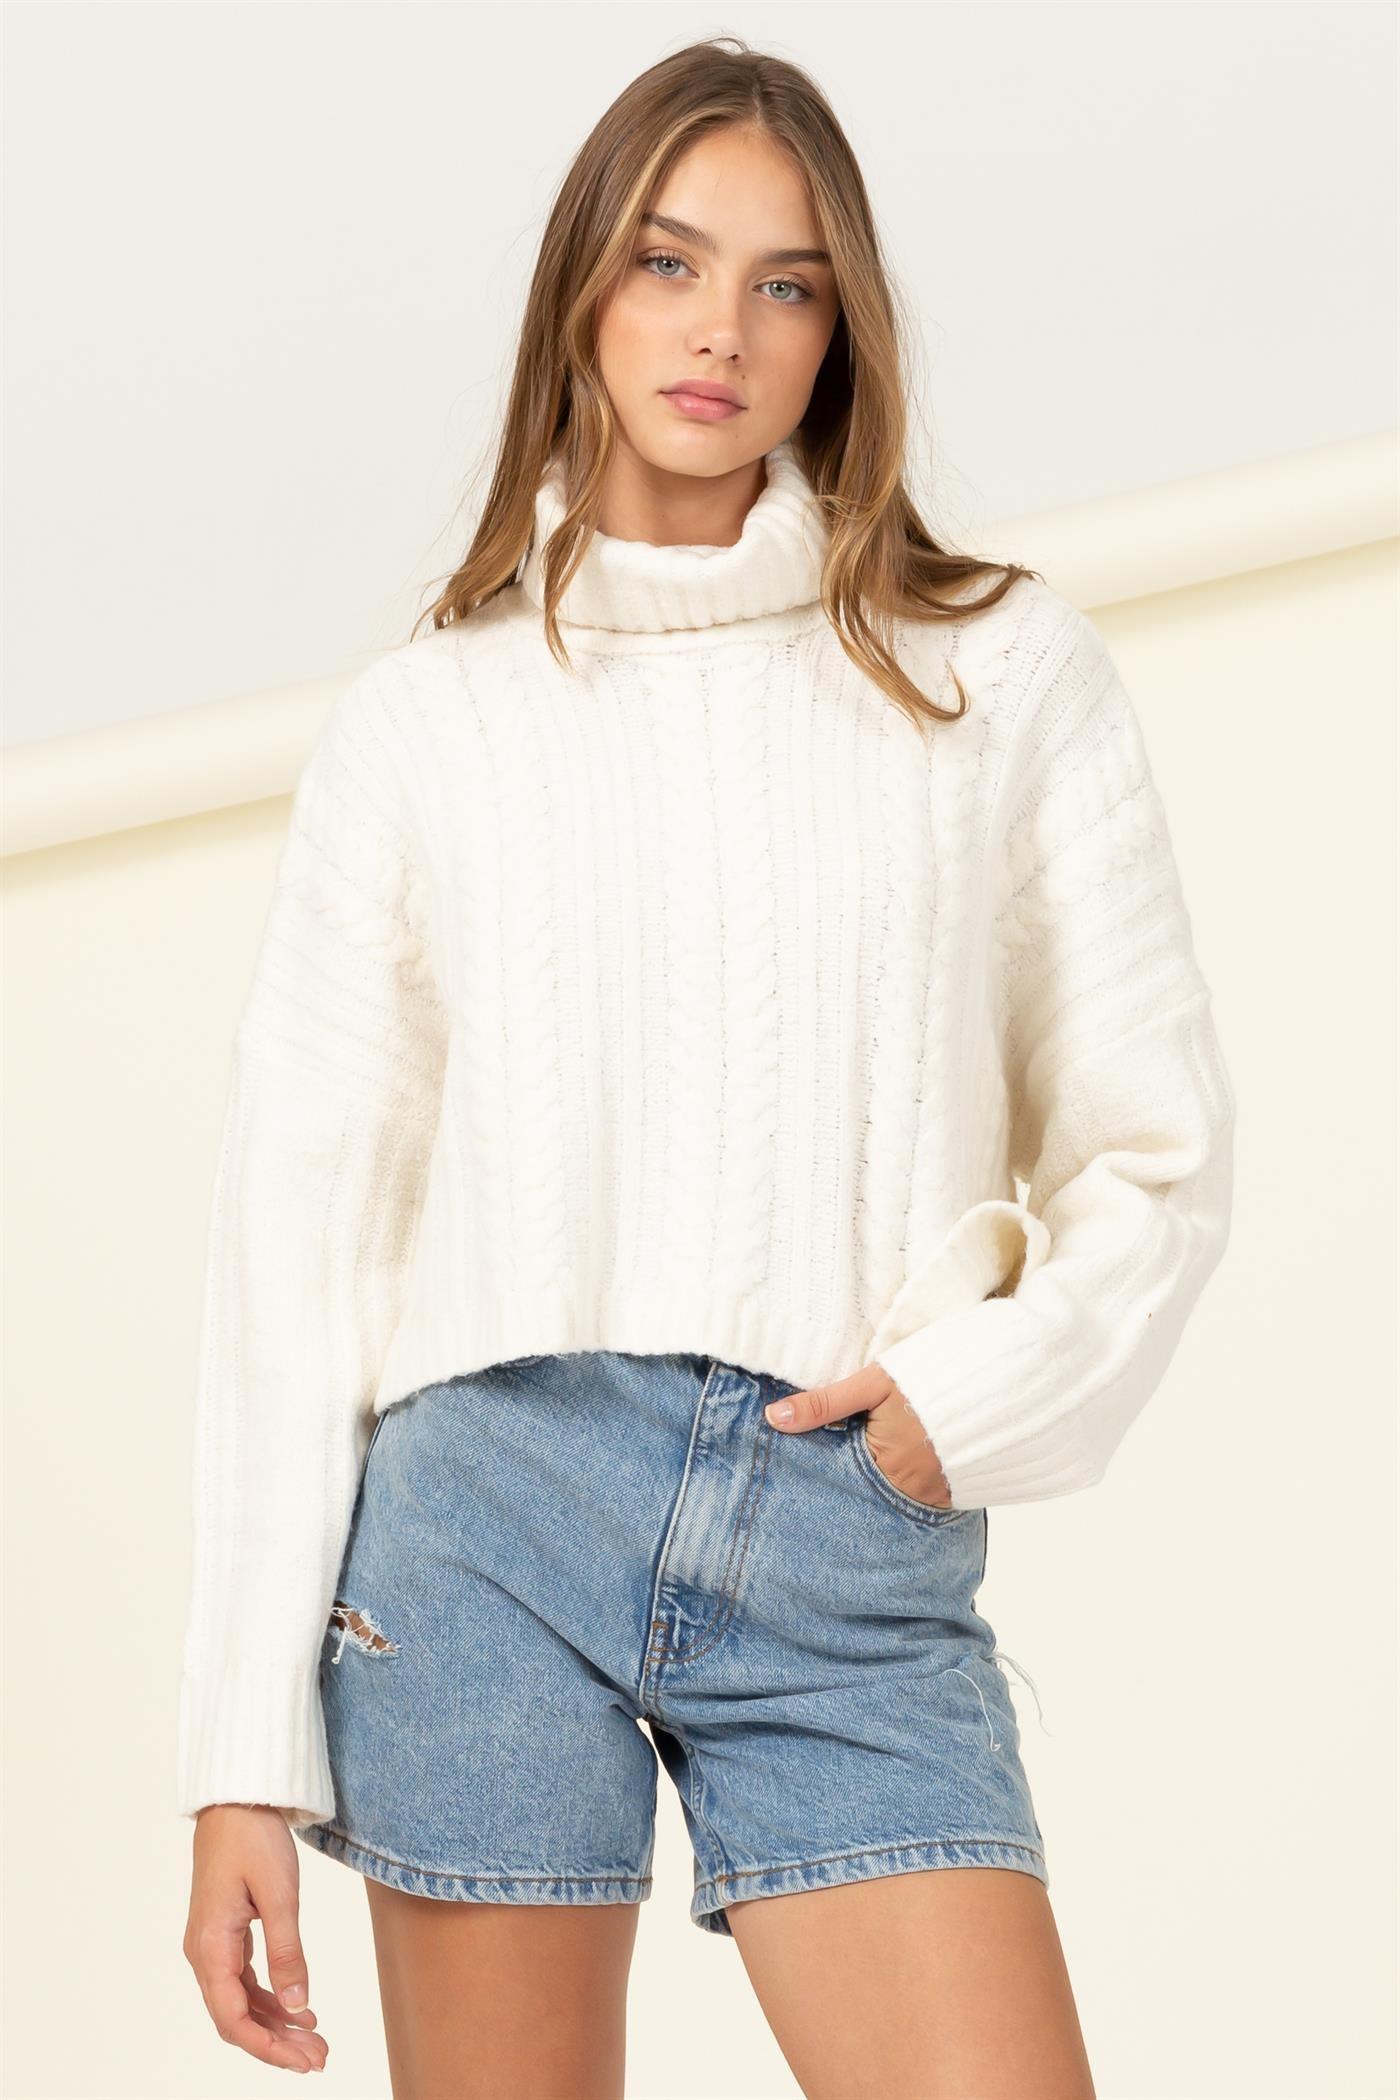 turtleneck box crop sweater - RK Collections Boutique